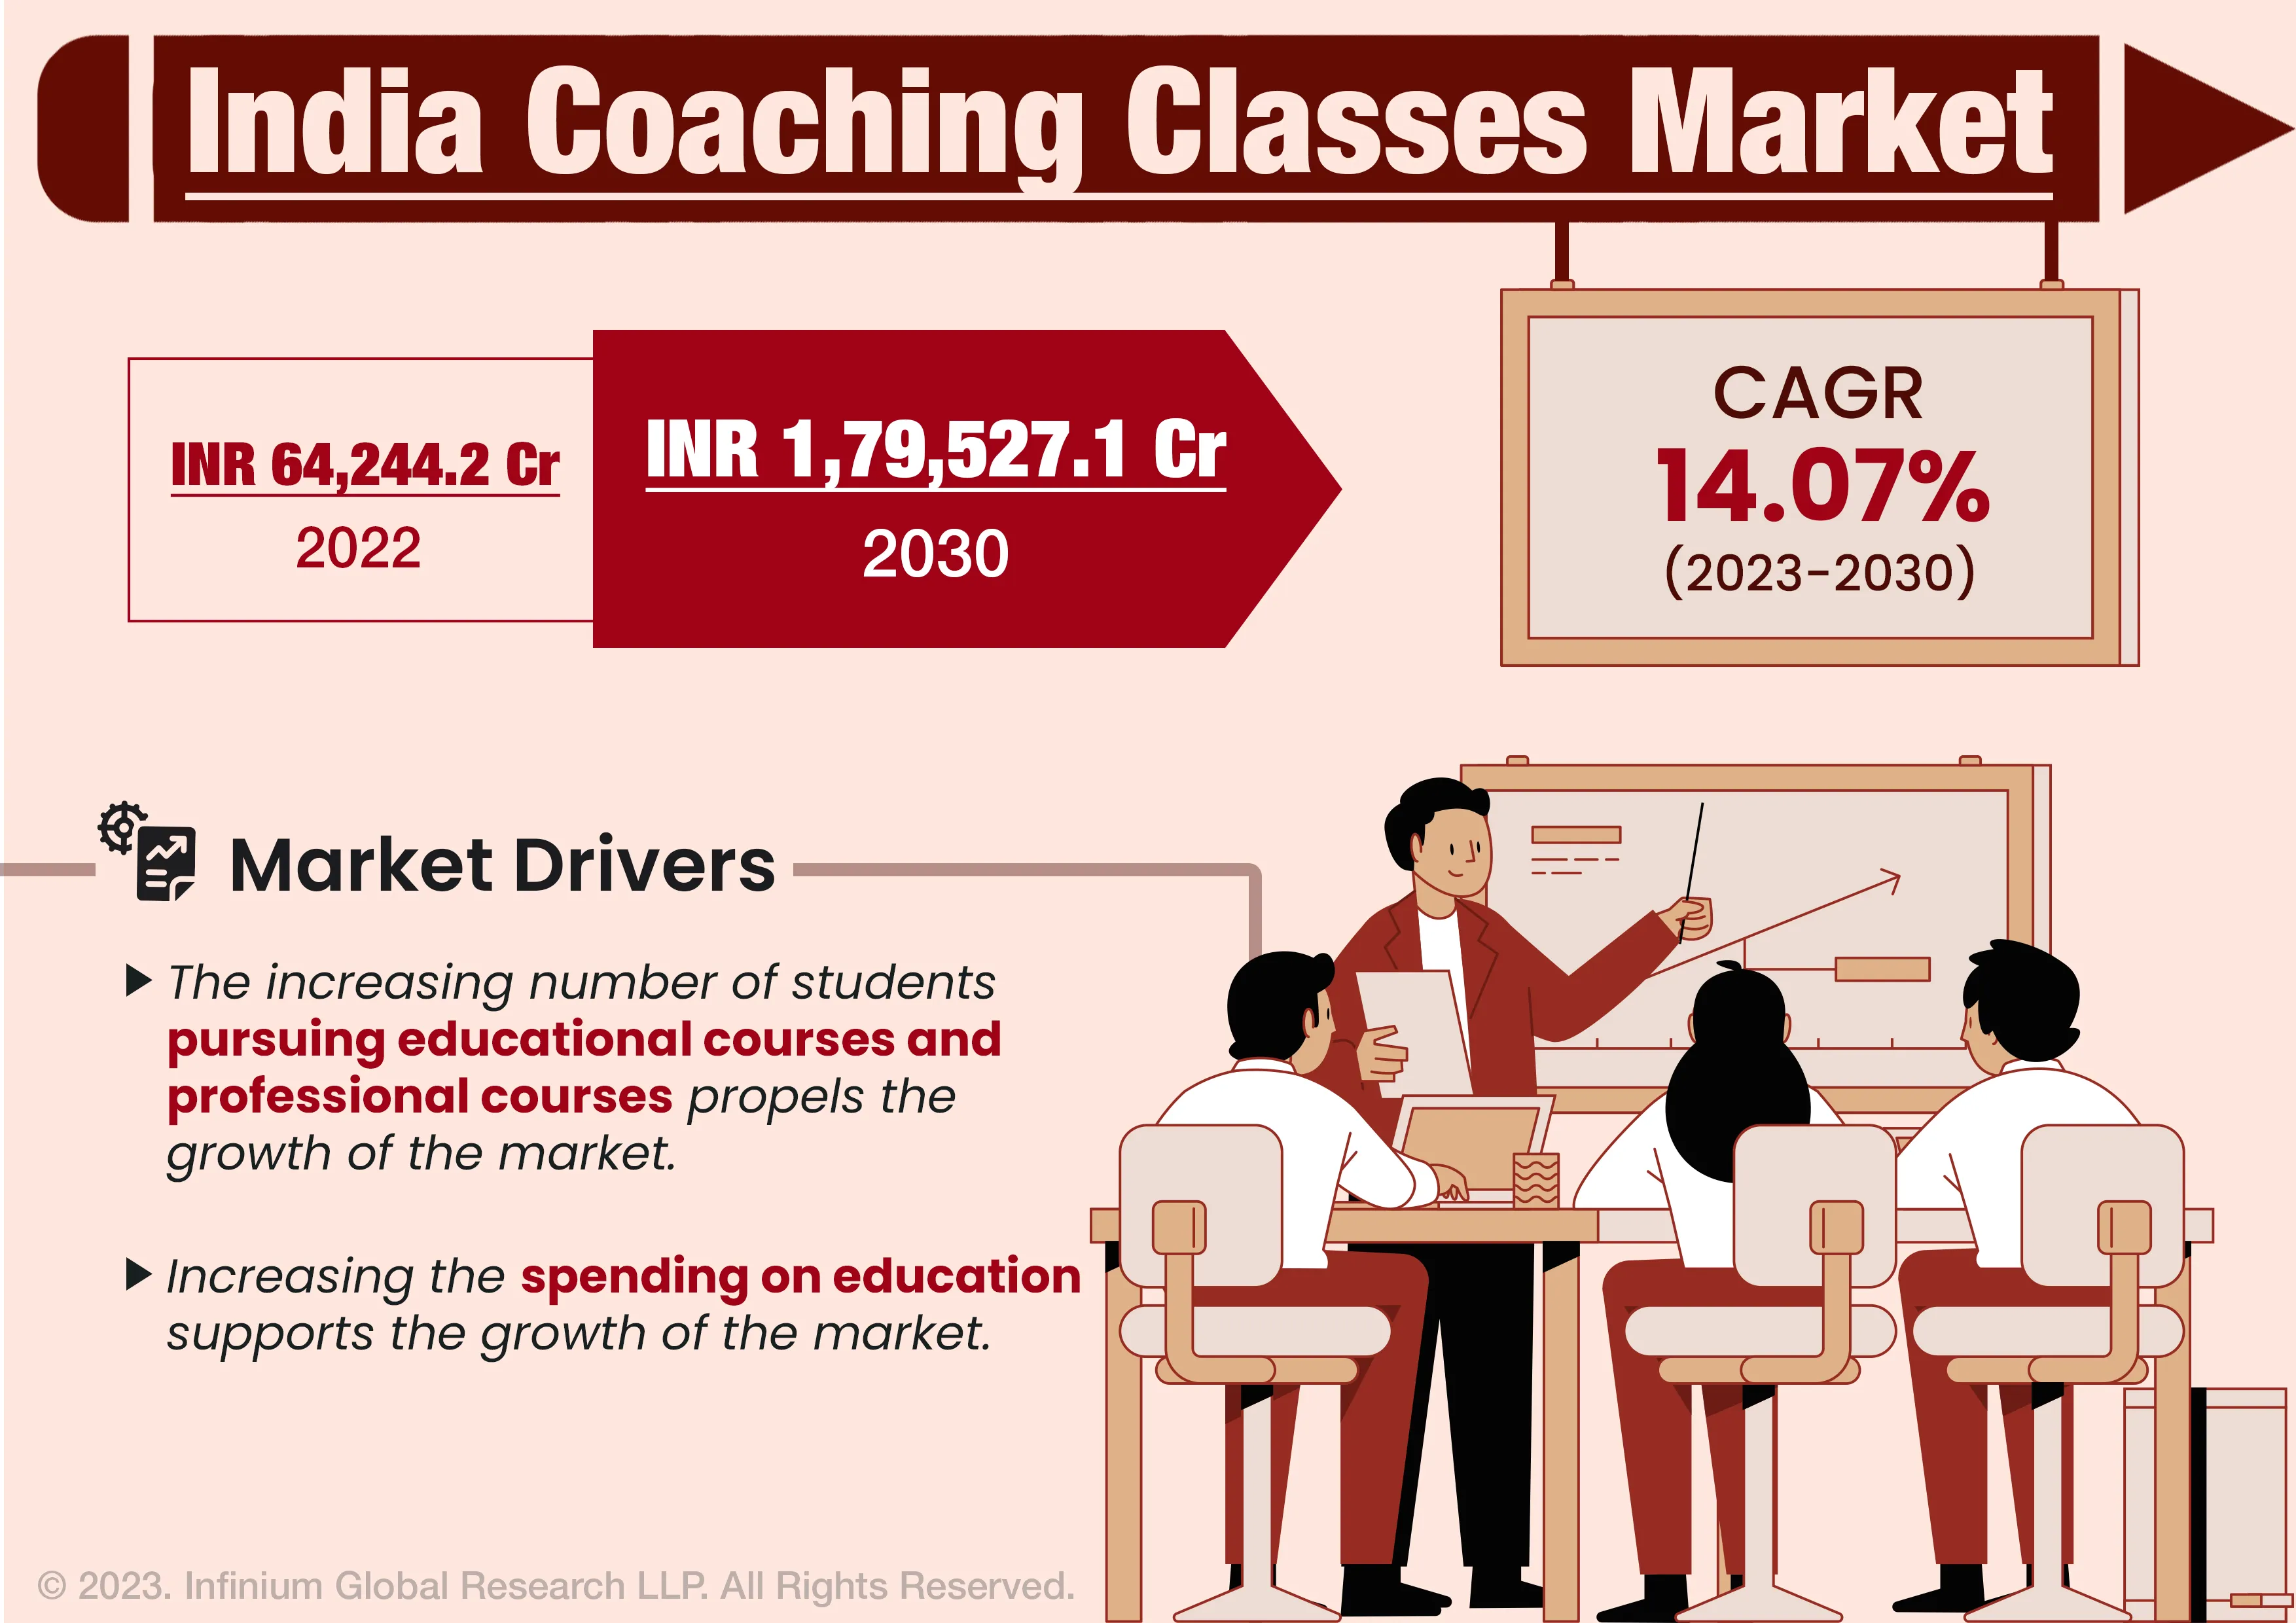 Infograph - India Coaching Classes Market was Valued at INR 64,244.2 Crore in 2022 and